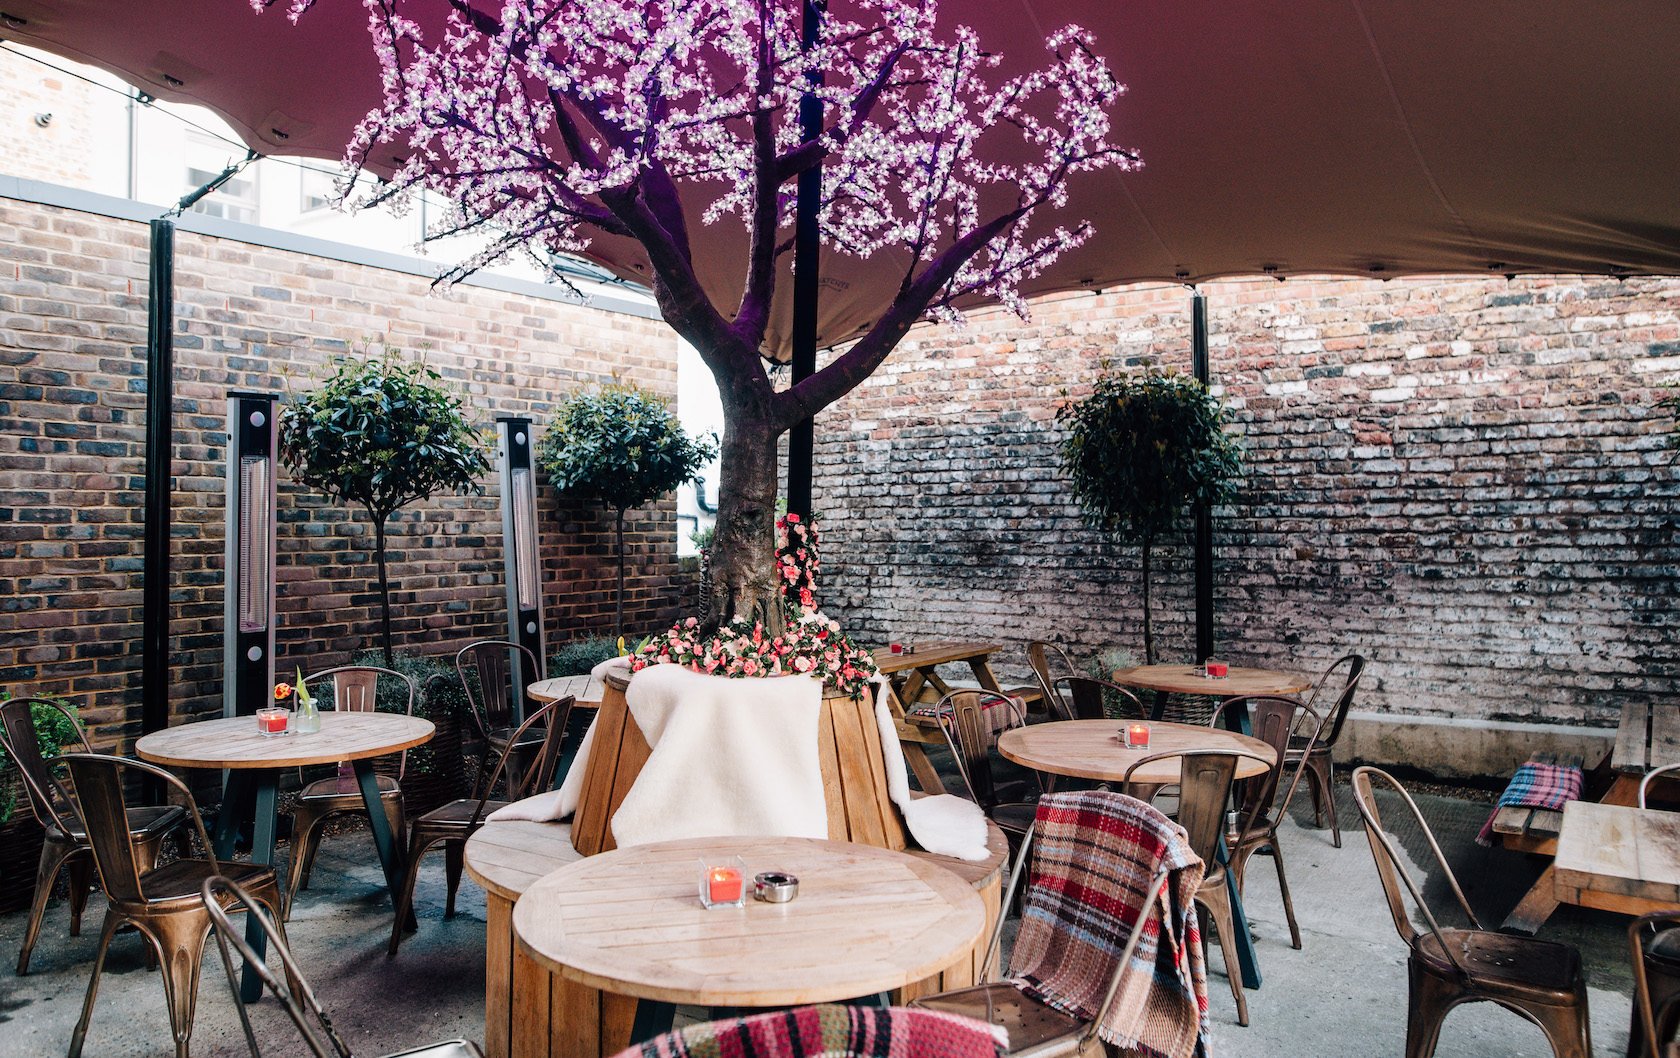 London Pub Beer Gardens by London Perfect